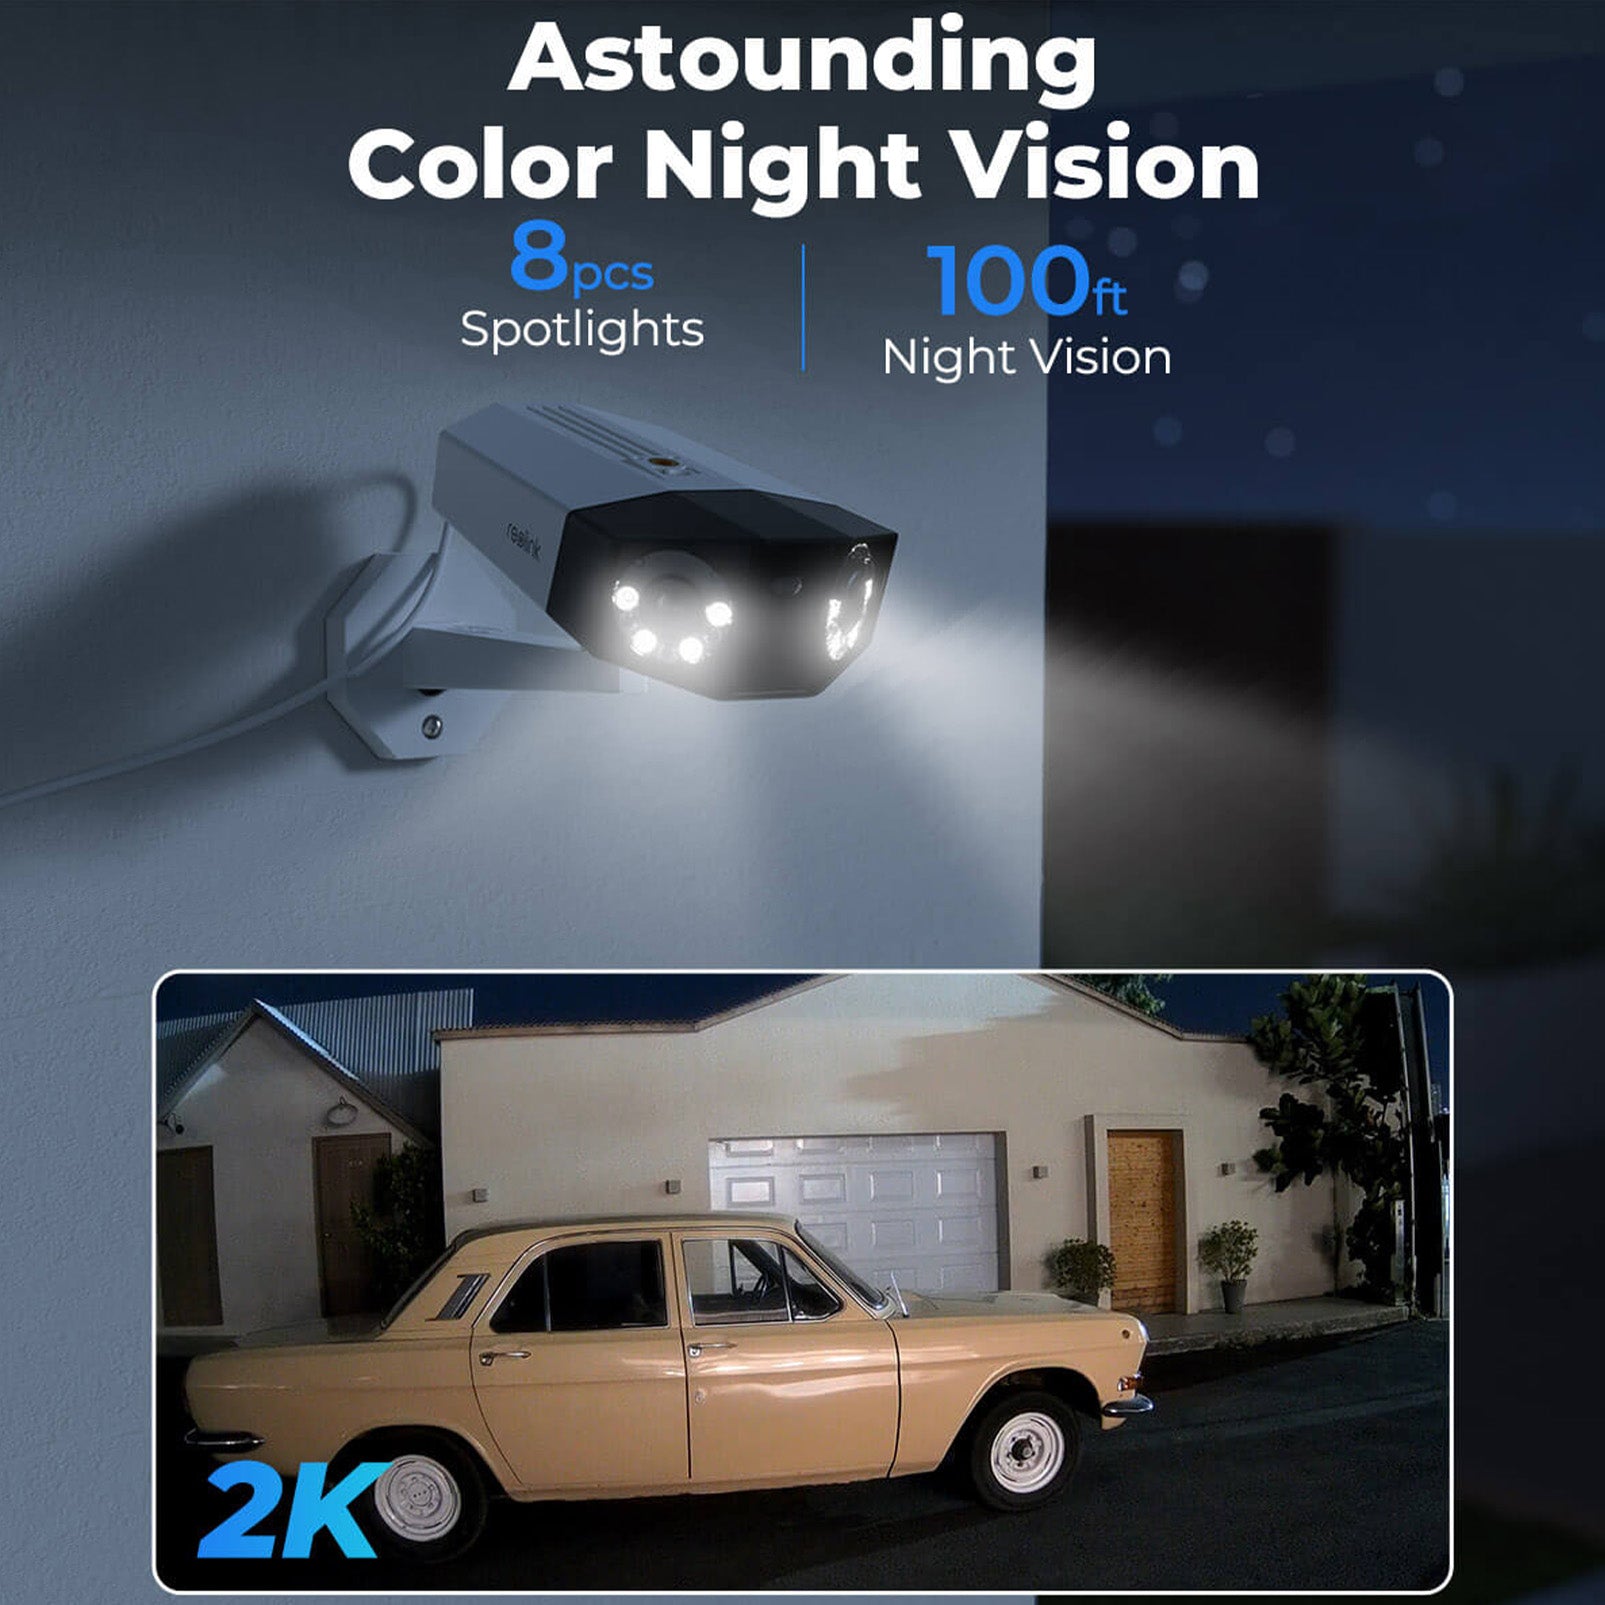 Reolink Duo PoE Smart 2K PoE Camera with Dual Lenses | 150° Wide Viewing Angle, Person/Vehicle Detection, Colour Night Vision